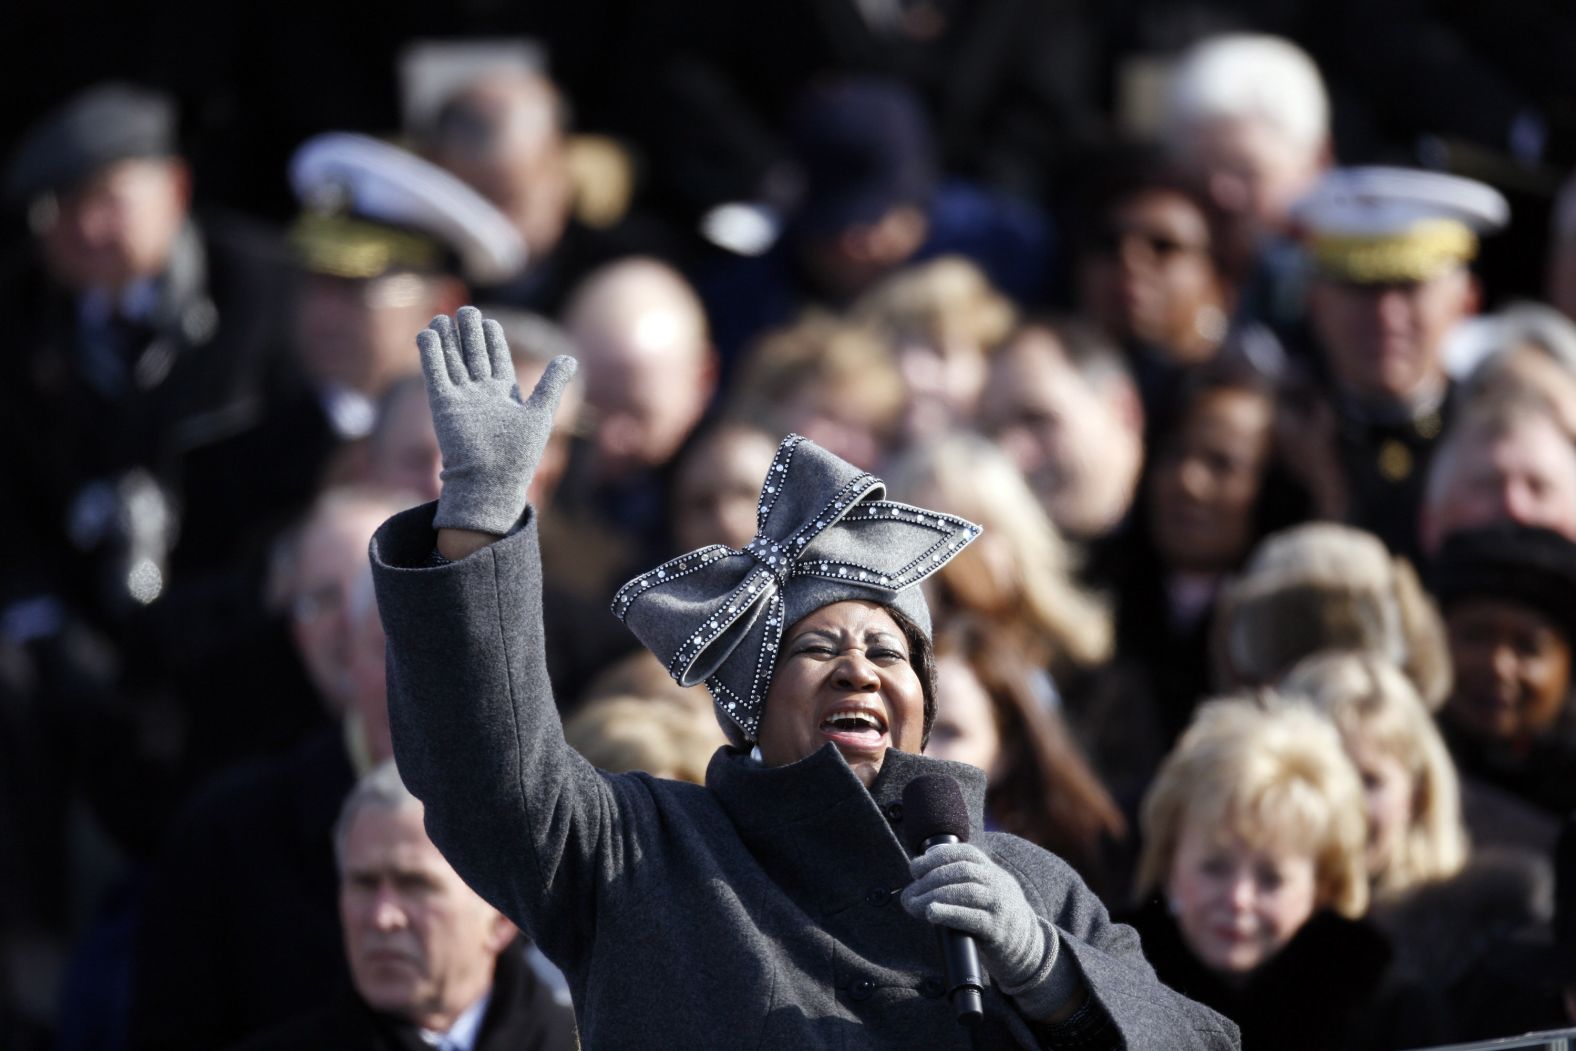 Franklin performed "My Country 'Tis of Thee" at the inauguration of President Barack Obama in 2009. 